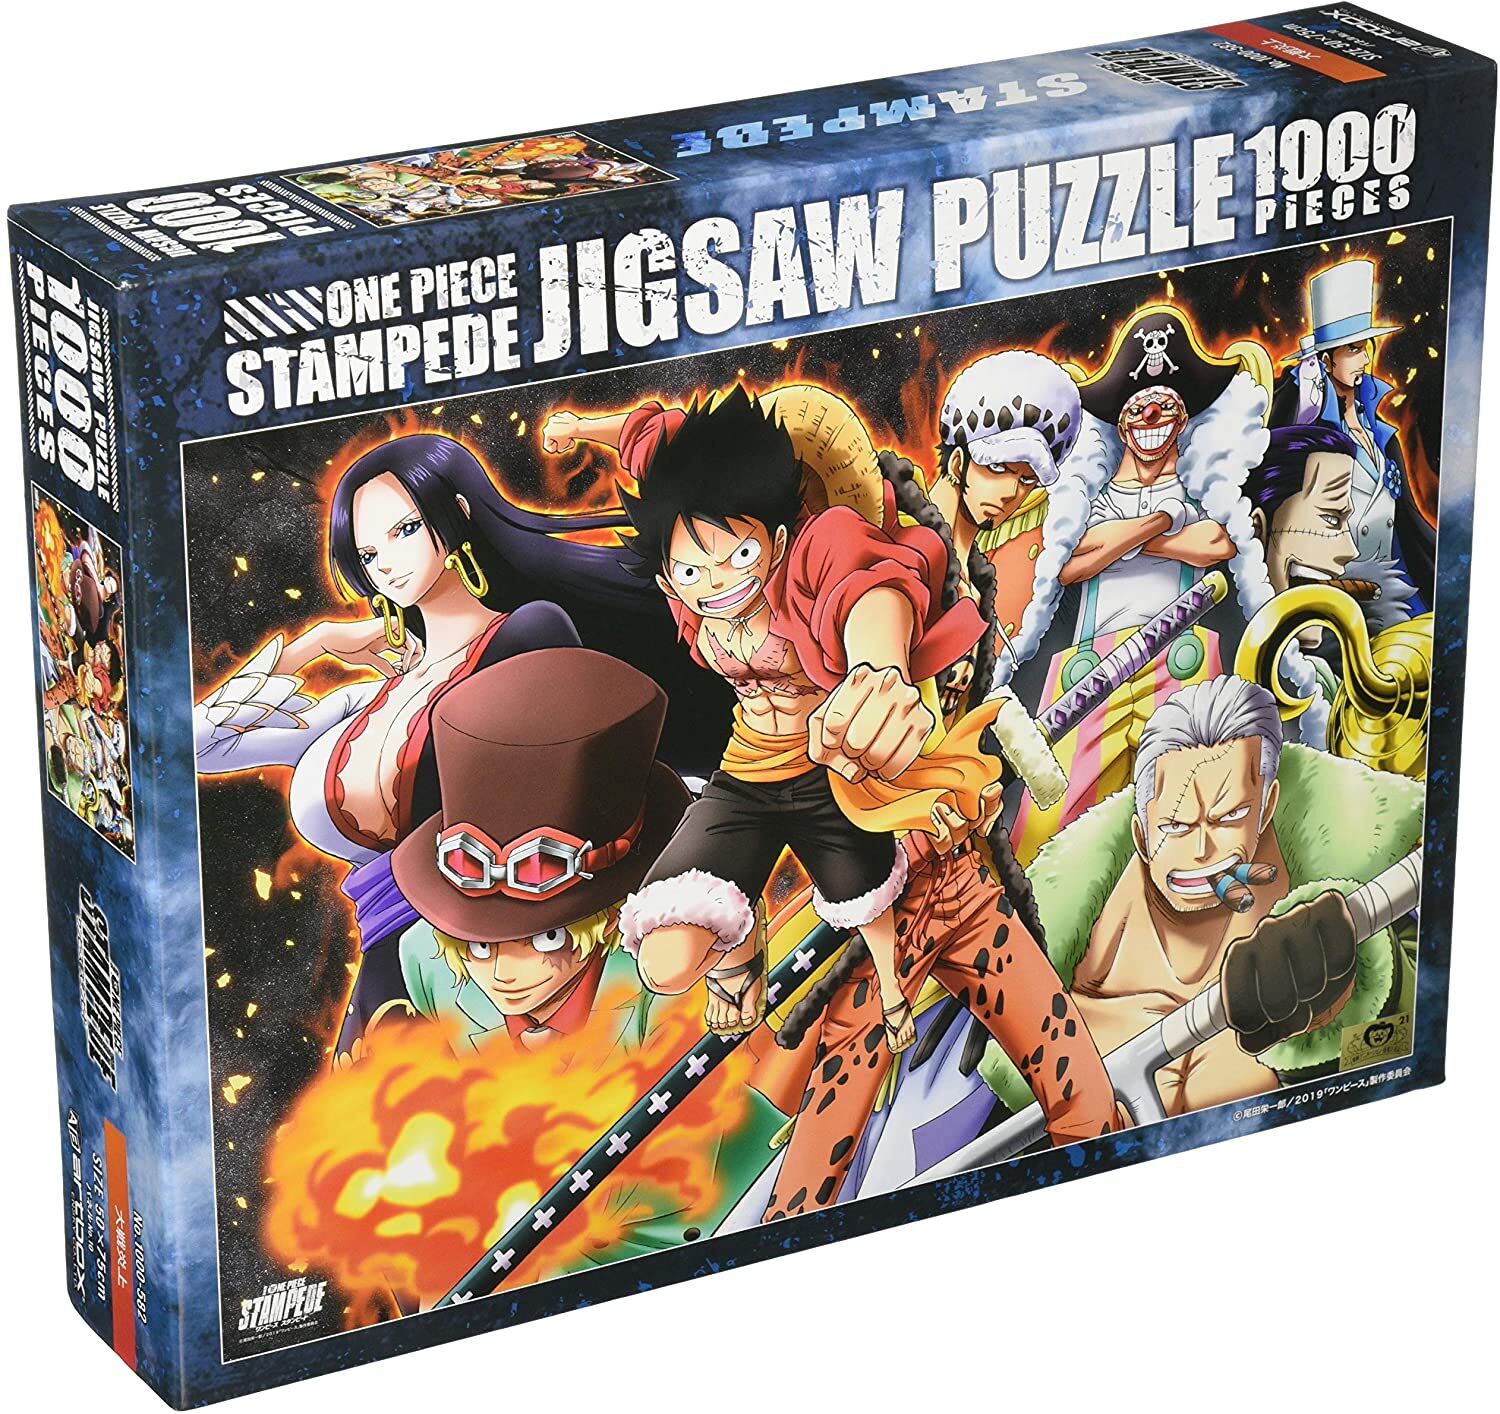 (PUZZLE) ONE PIECE Jigsaw Ensky Puzzle “ONE PIECE STAMPEDE” The Movie (1000 pcs)